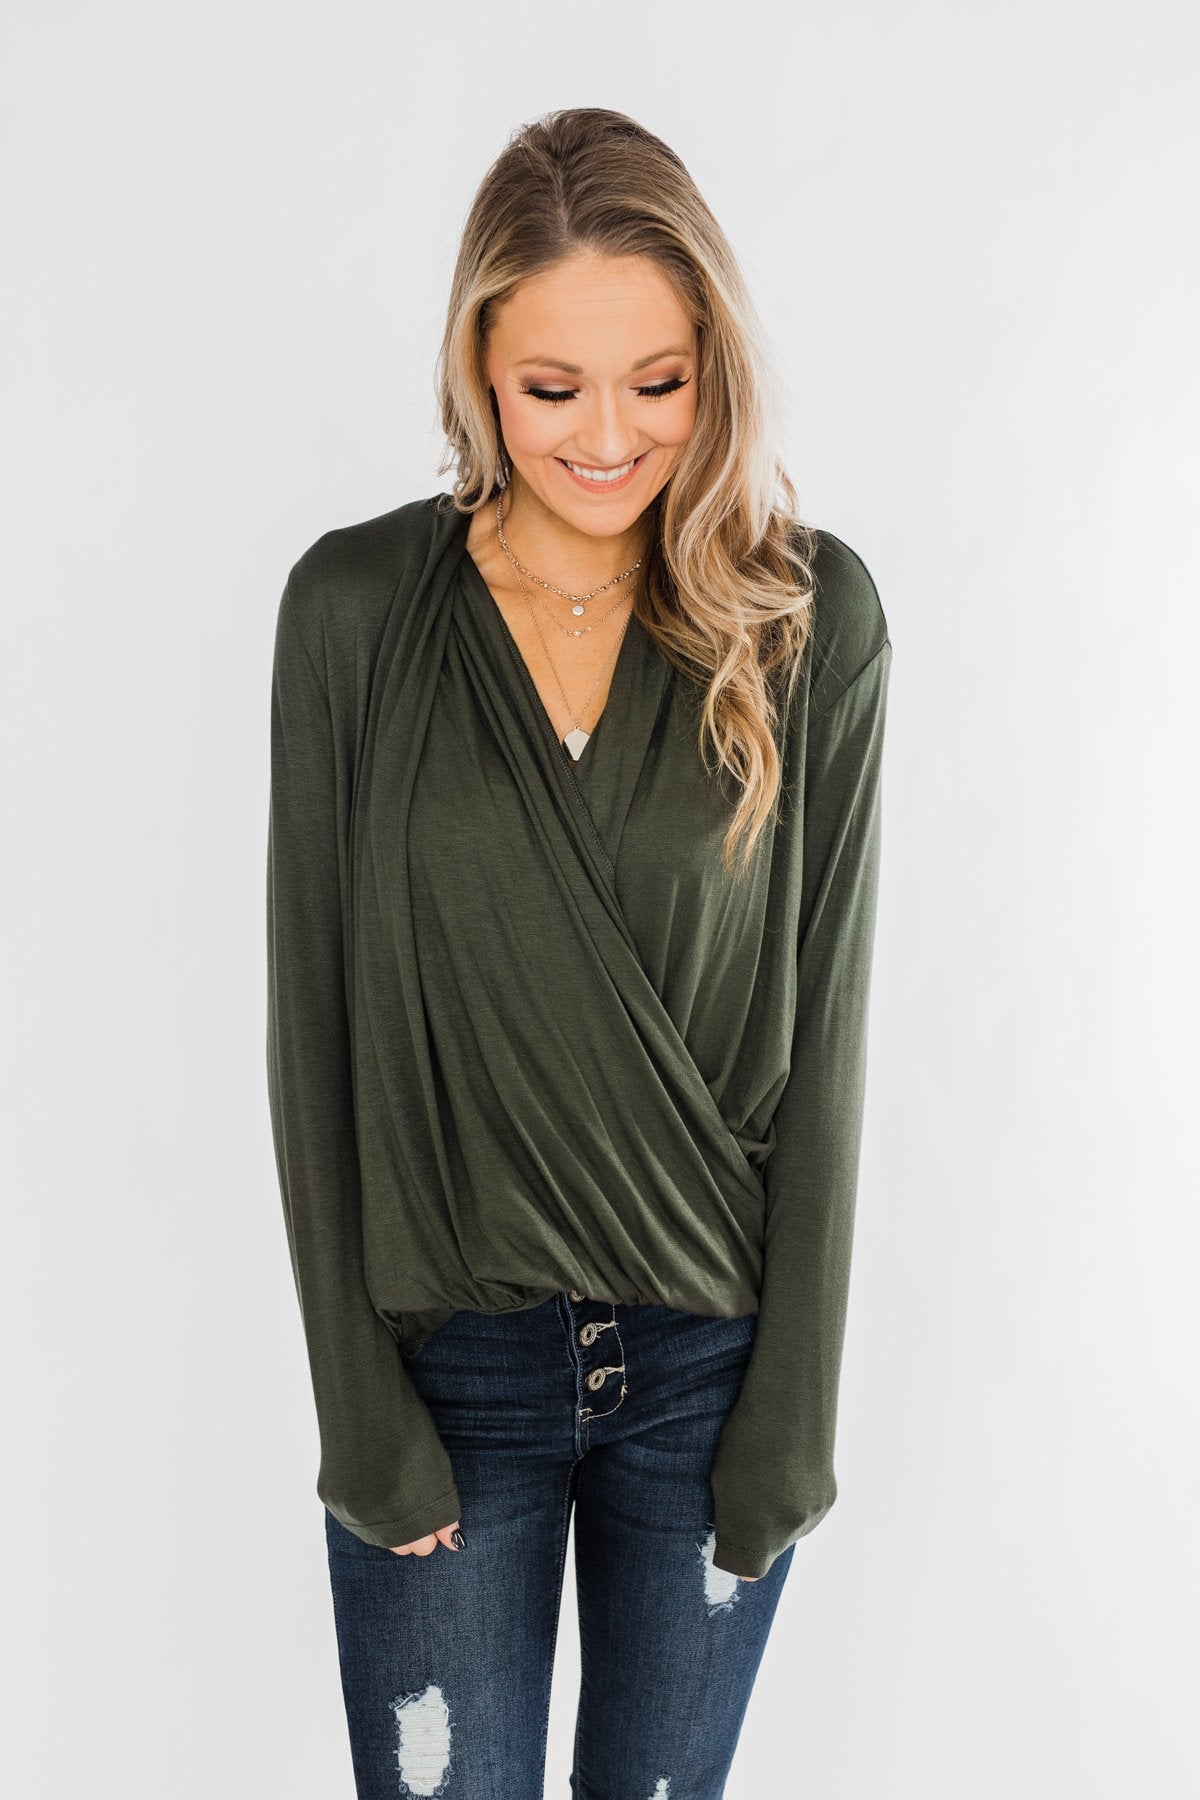 Can't Help This Feeling Front Wrap Top- Olive